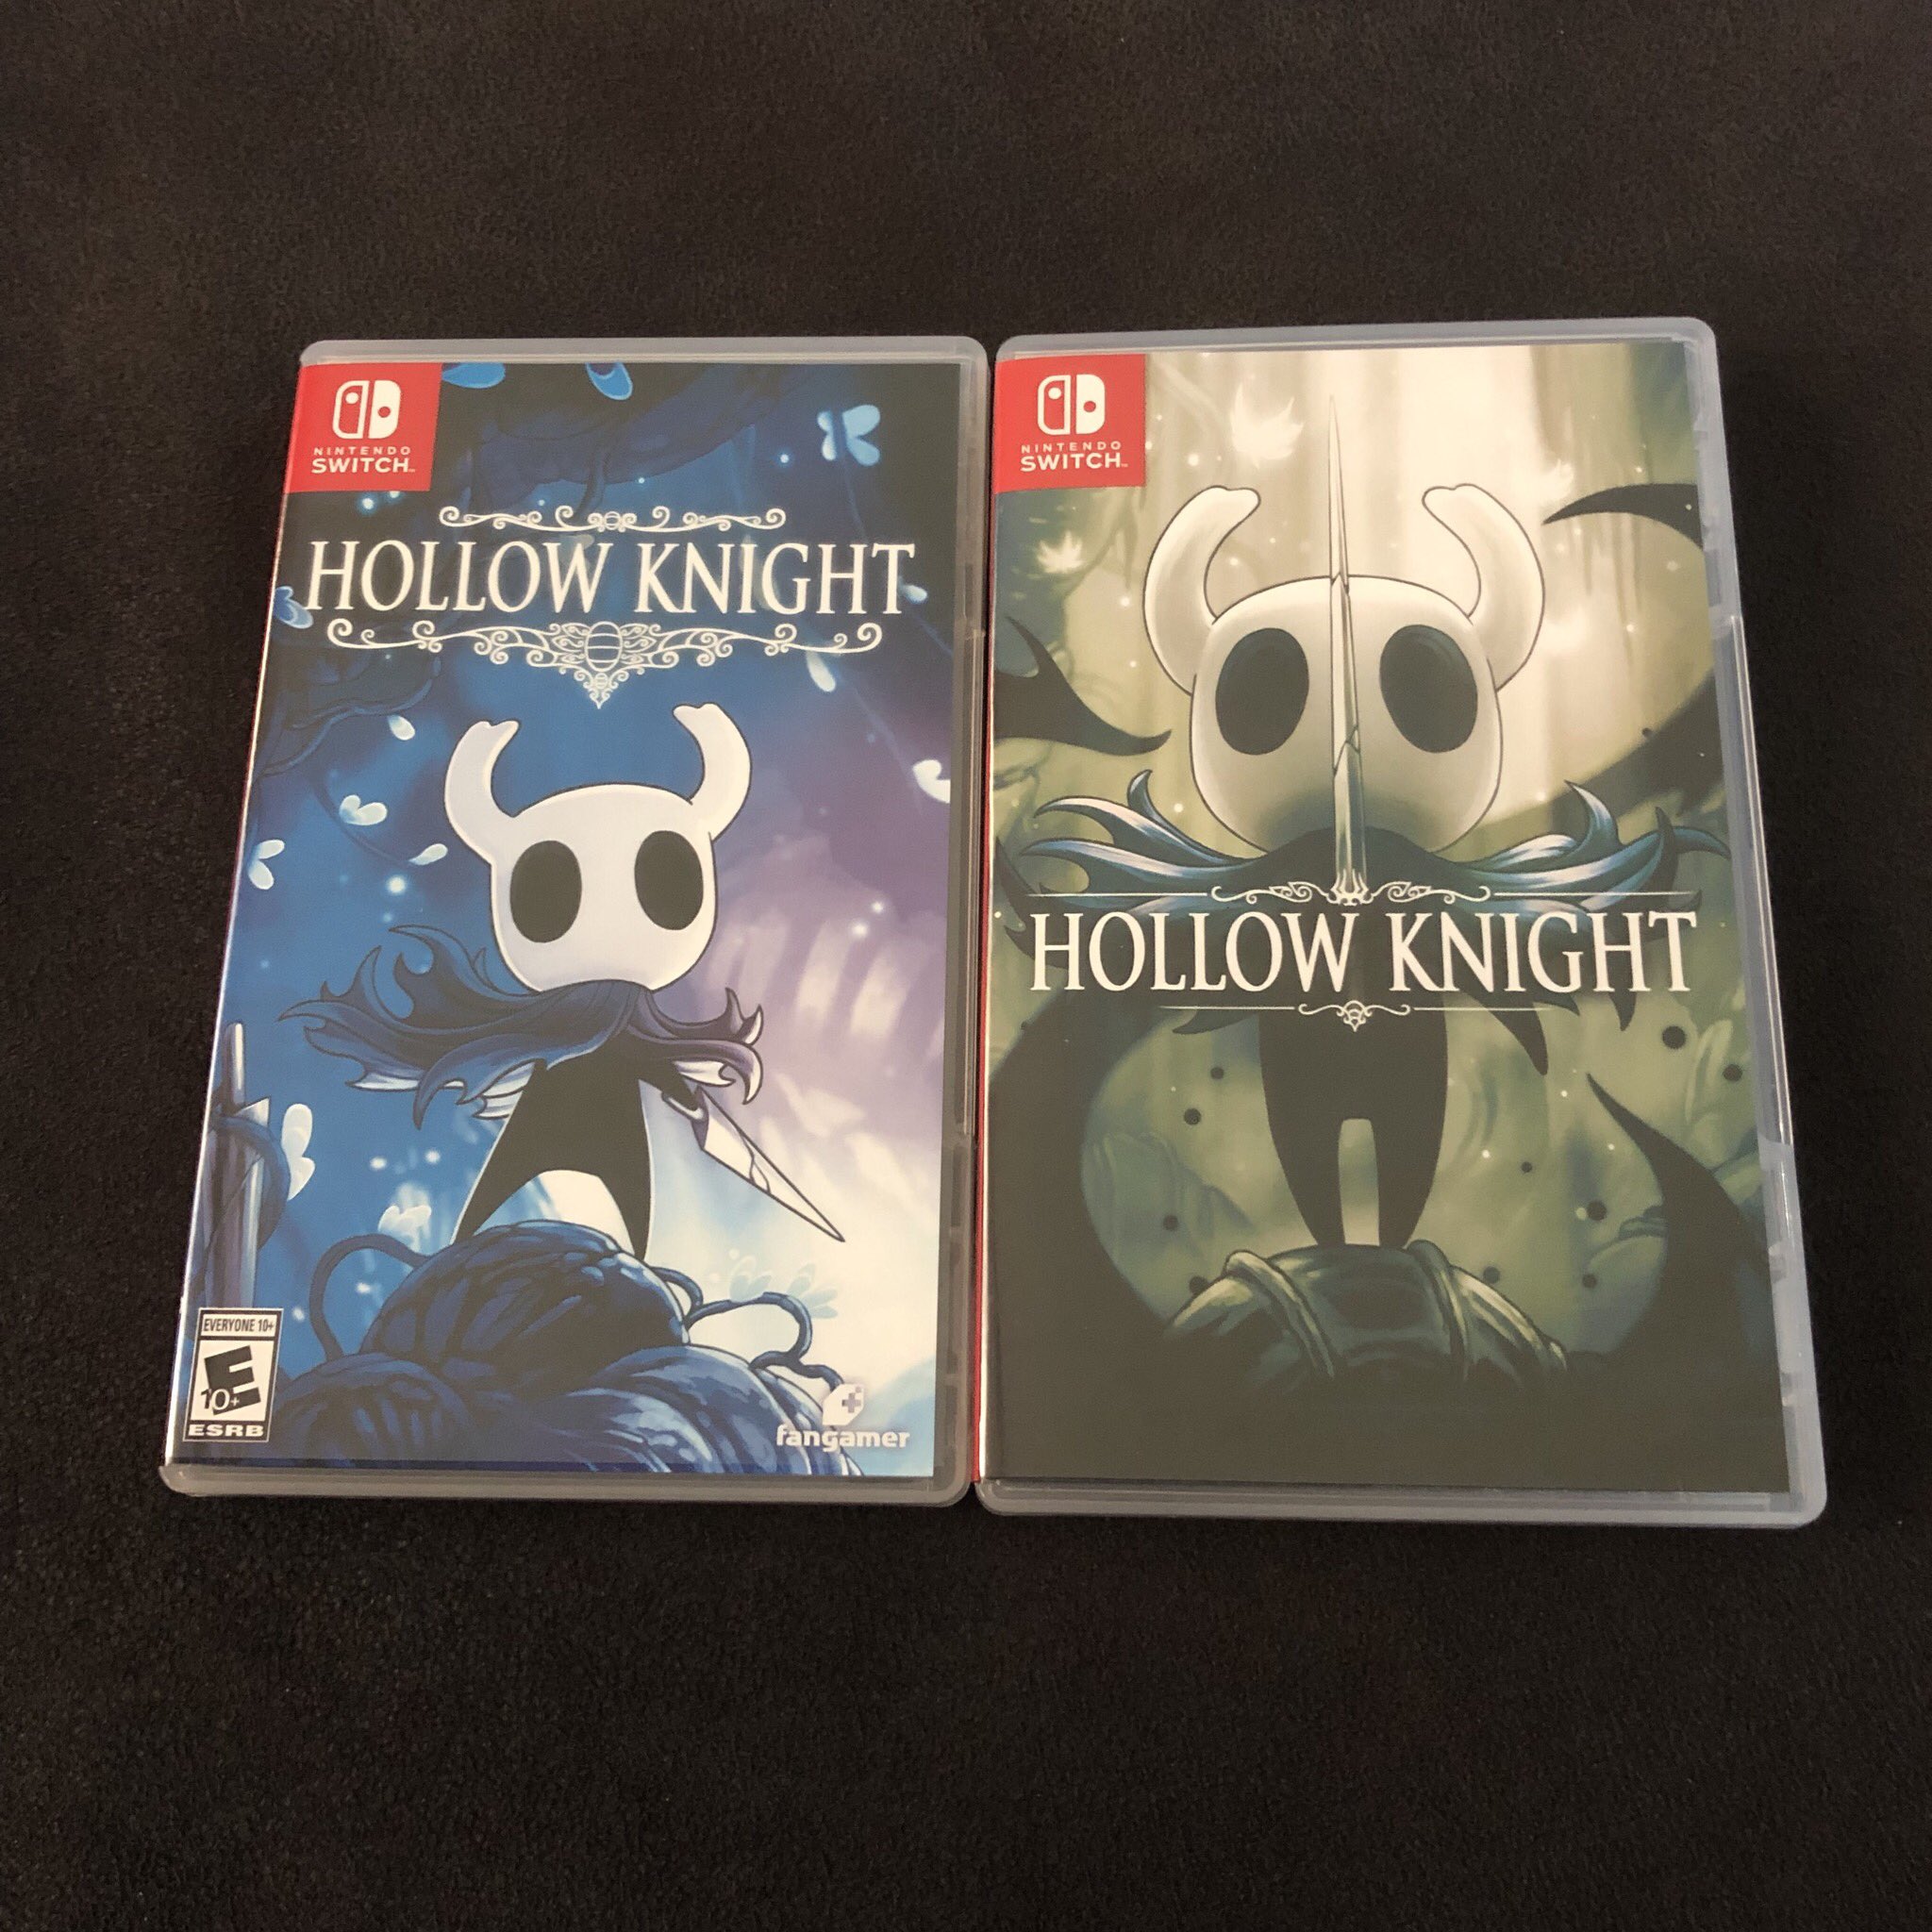 Matthew Griffin on Twitter: "Reminder if you got Hollow Knight (Nintendo  Switch physical) today: The cover is reversible! &lt;3  https://t.co/UbkxGsxreA" / Twitter